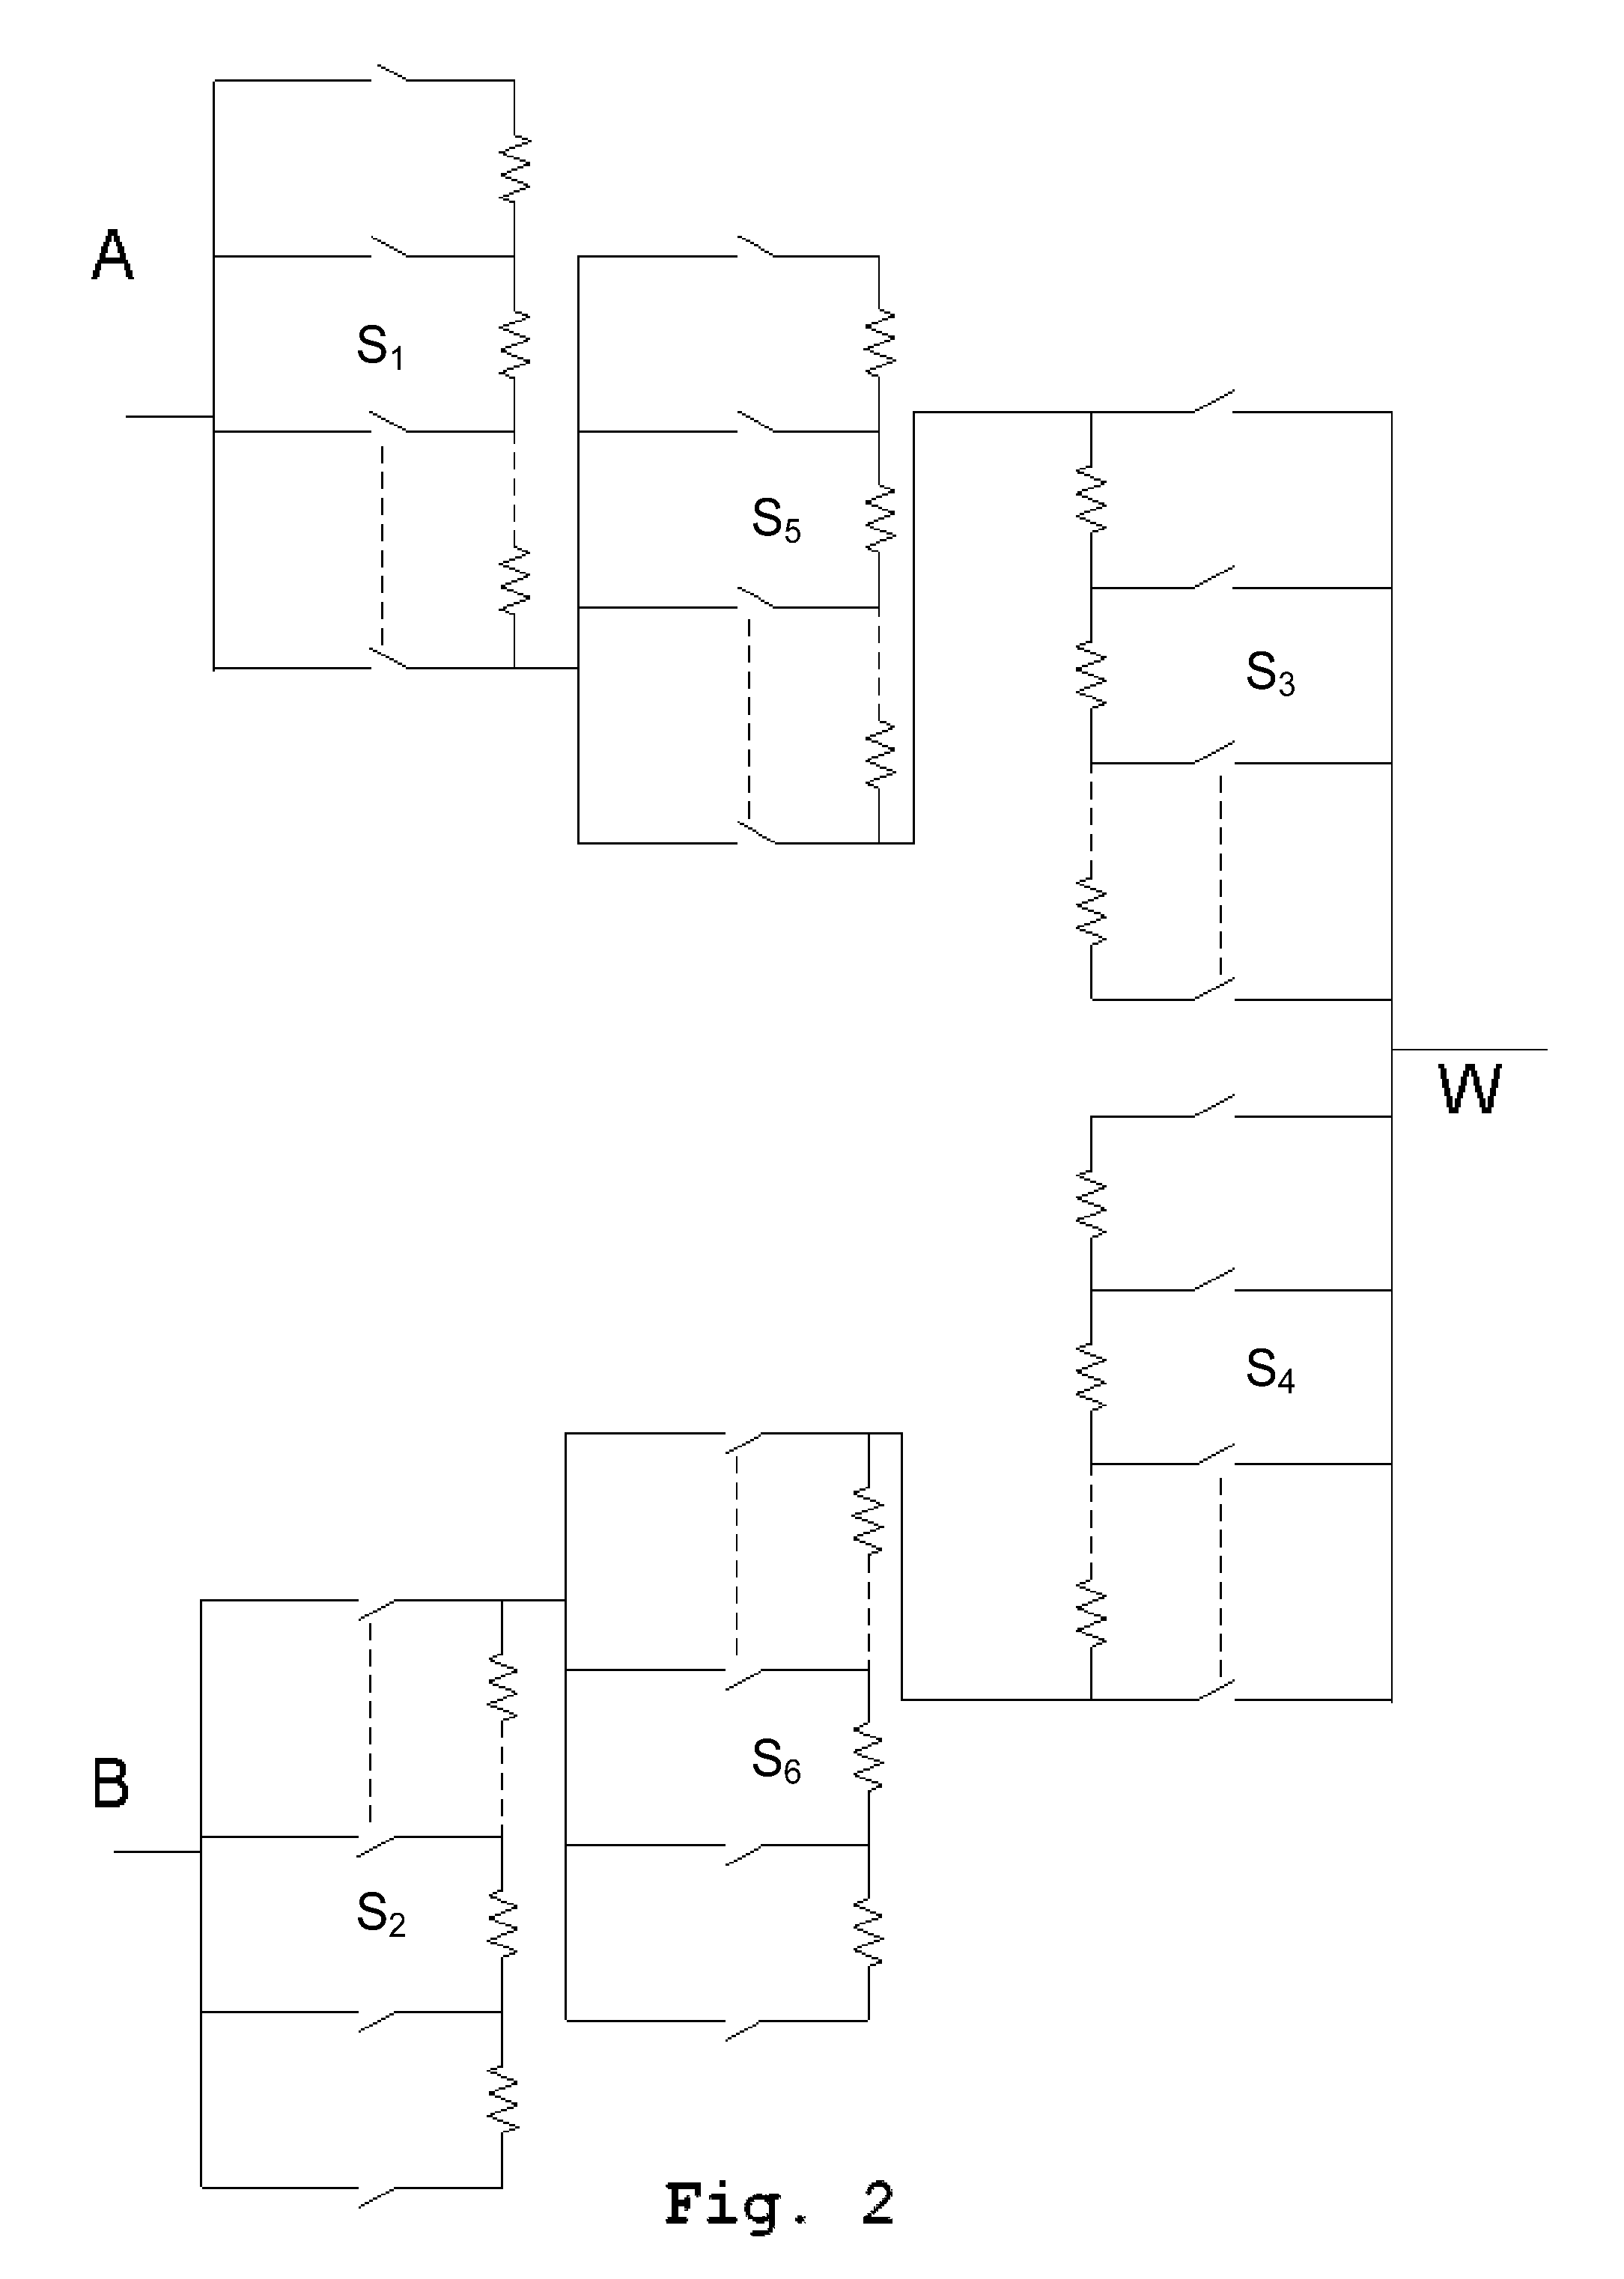 Digital potentiometer architecture with multiple string arrays allowing for independent calibration in rheostat mode